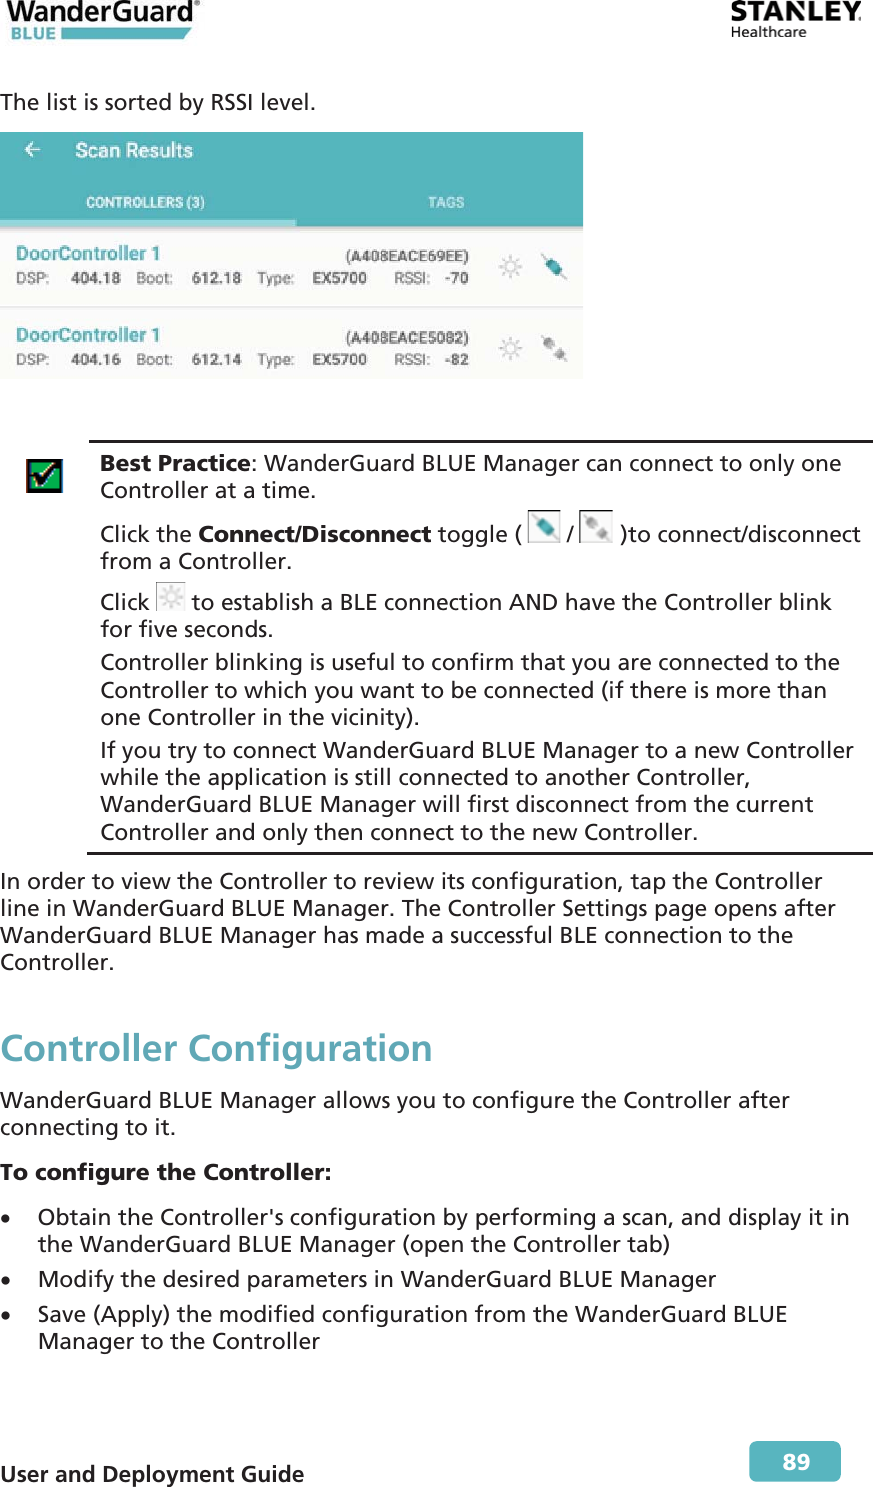  User and Deployment Guide        89 The list is sorted by RSSI level.    Best Practice: WanderGuard BLUE Manager can connect to only one Controller at a time. Click the Connect/Disconnect toggle (   /   )to connect/disconnect from a Controller. Click   to establish a BLE connection AND have the Controller blink for five seconds. Controller blinking is useful to confirm that you are connected to the Controller to which you want to be connected (if there is more than one Controller in the vicinity). If you try to connect WanderGuard BLUE Manager to a new Controller while the application is still connected to another Controller, WanderGuard BLUE Manager will first disconnect from the current Controller and only then connect to the new Controller. In order to view the Controller to review its configuration, tap the Controller line in WanderGuard BLUE Manager. The Controller Settings page opens after WanderGuard BLUE Manager has made a successful BLE connection to the Controller. Controller ConfigurationWanderGuard BLUE Manager allows you to configure the Controller after connecting to it. To configure the Controller: x Obtain the Controller&apos;s configuration by performing a scan, and display it in the WanderGuard BLUE Manager (open the Controller tab) x Modify the desired parameters in WanderGuard BLUE Manager x Save (Apply) the modified configuration from the WanderGuard BLUE Manager to the Controller 